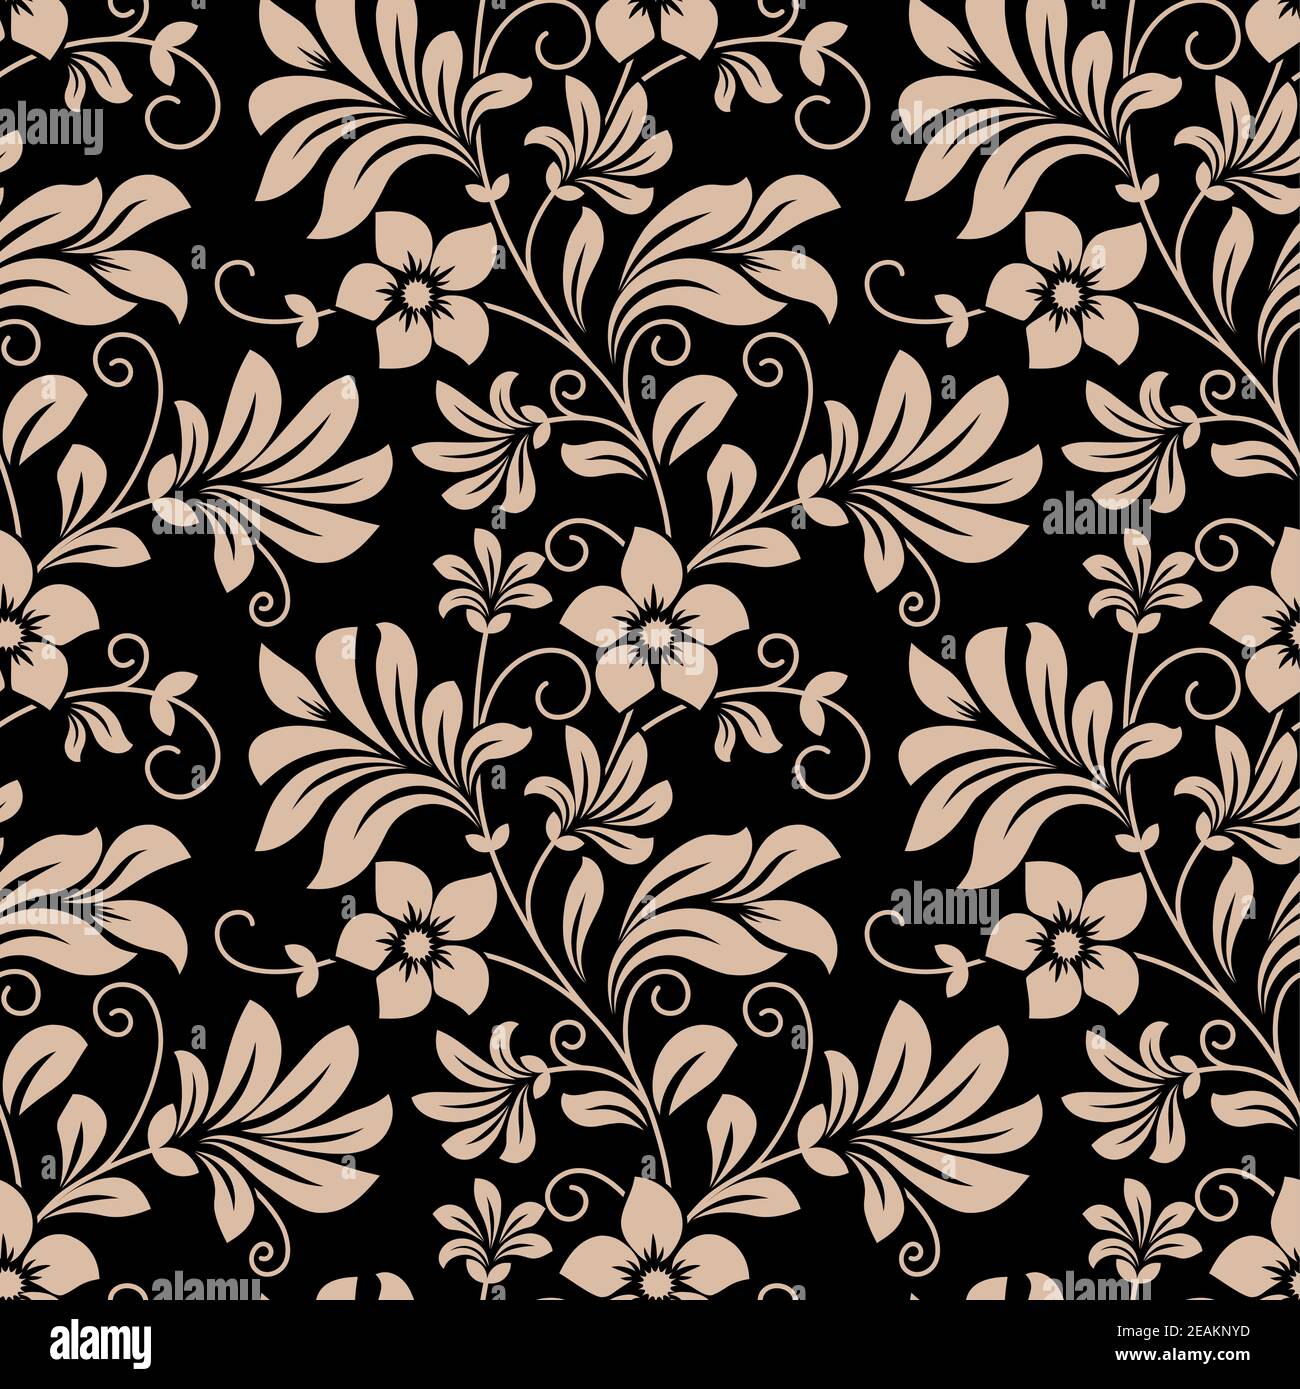 Vintage floral wallpaper seamless pattern with trailing tendrils of little  flowers on vertical vines with leaves in beige on black in square format  Stock Vector Image & Art - Alamy